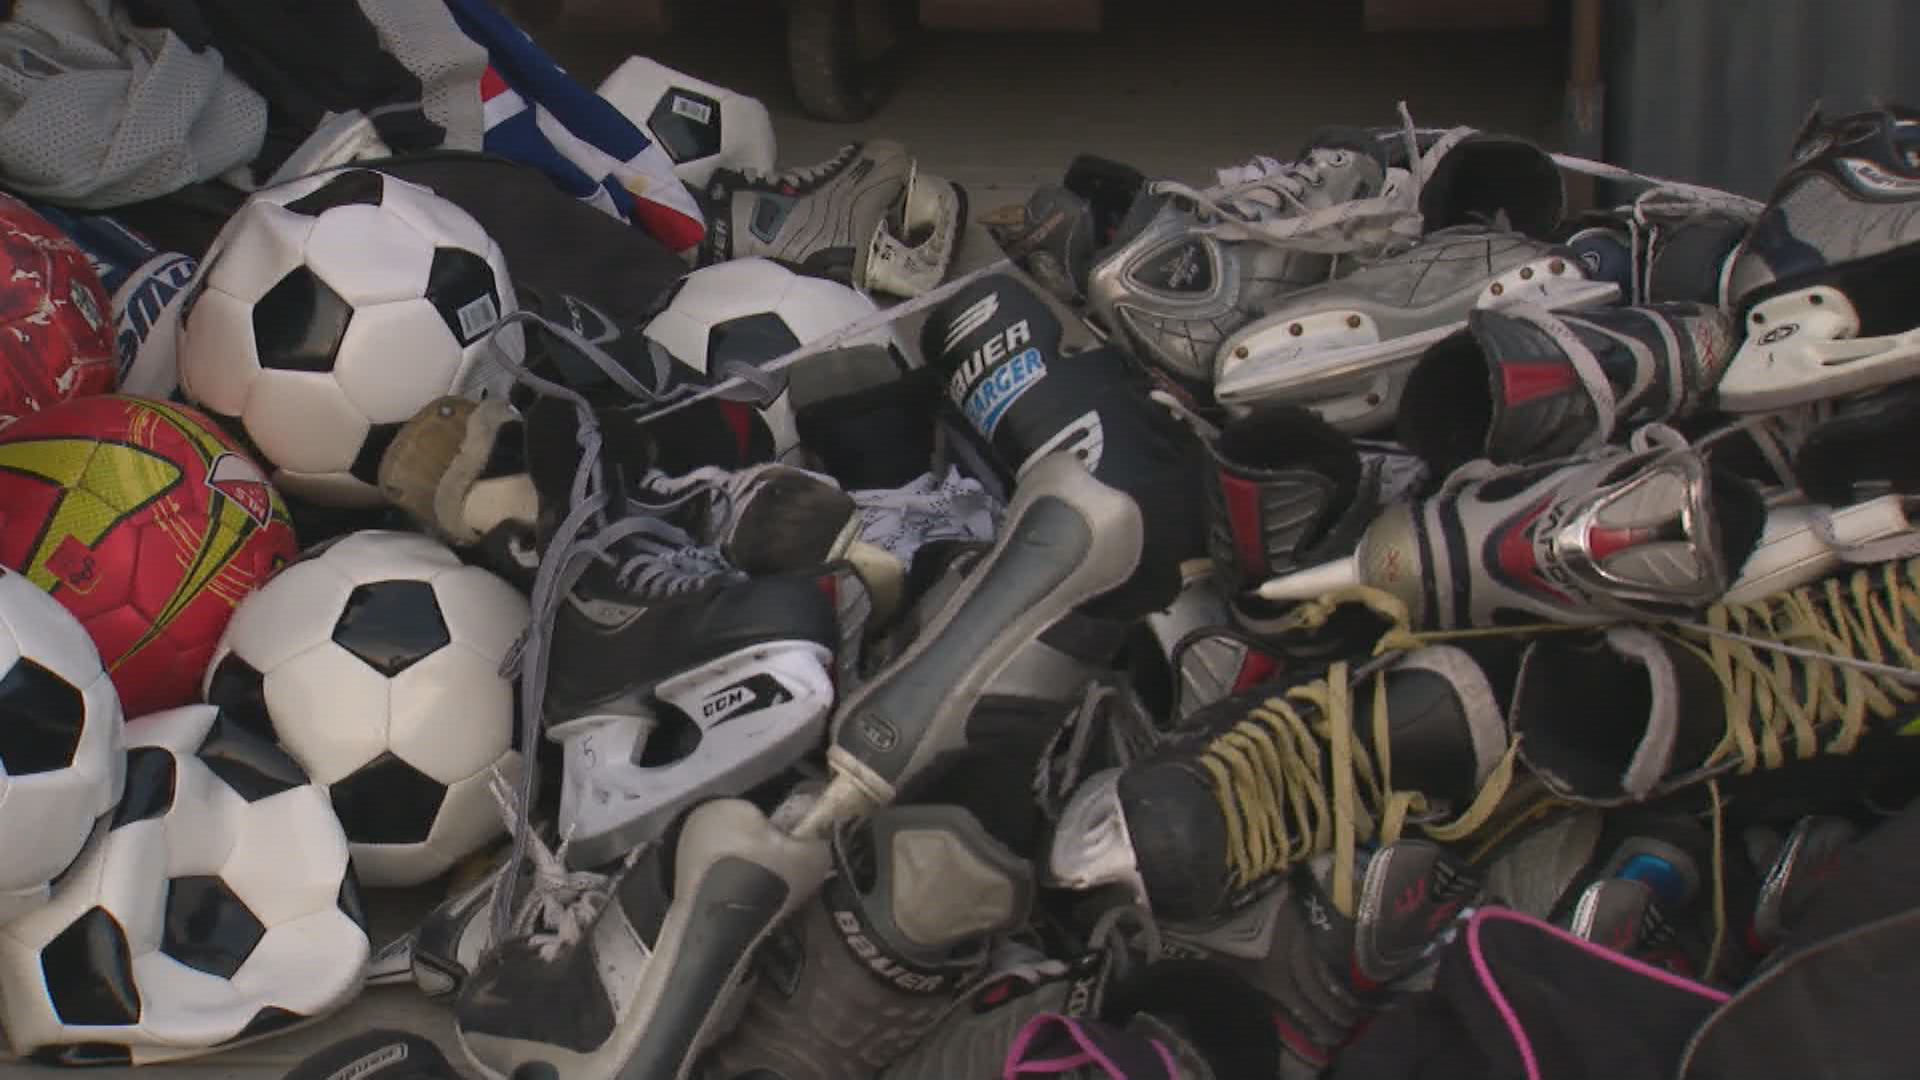 Skates, soccer balls, helmets and jerseys were among items found.